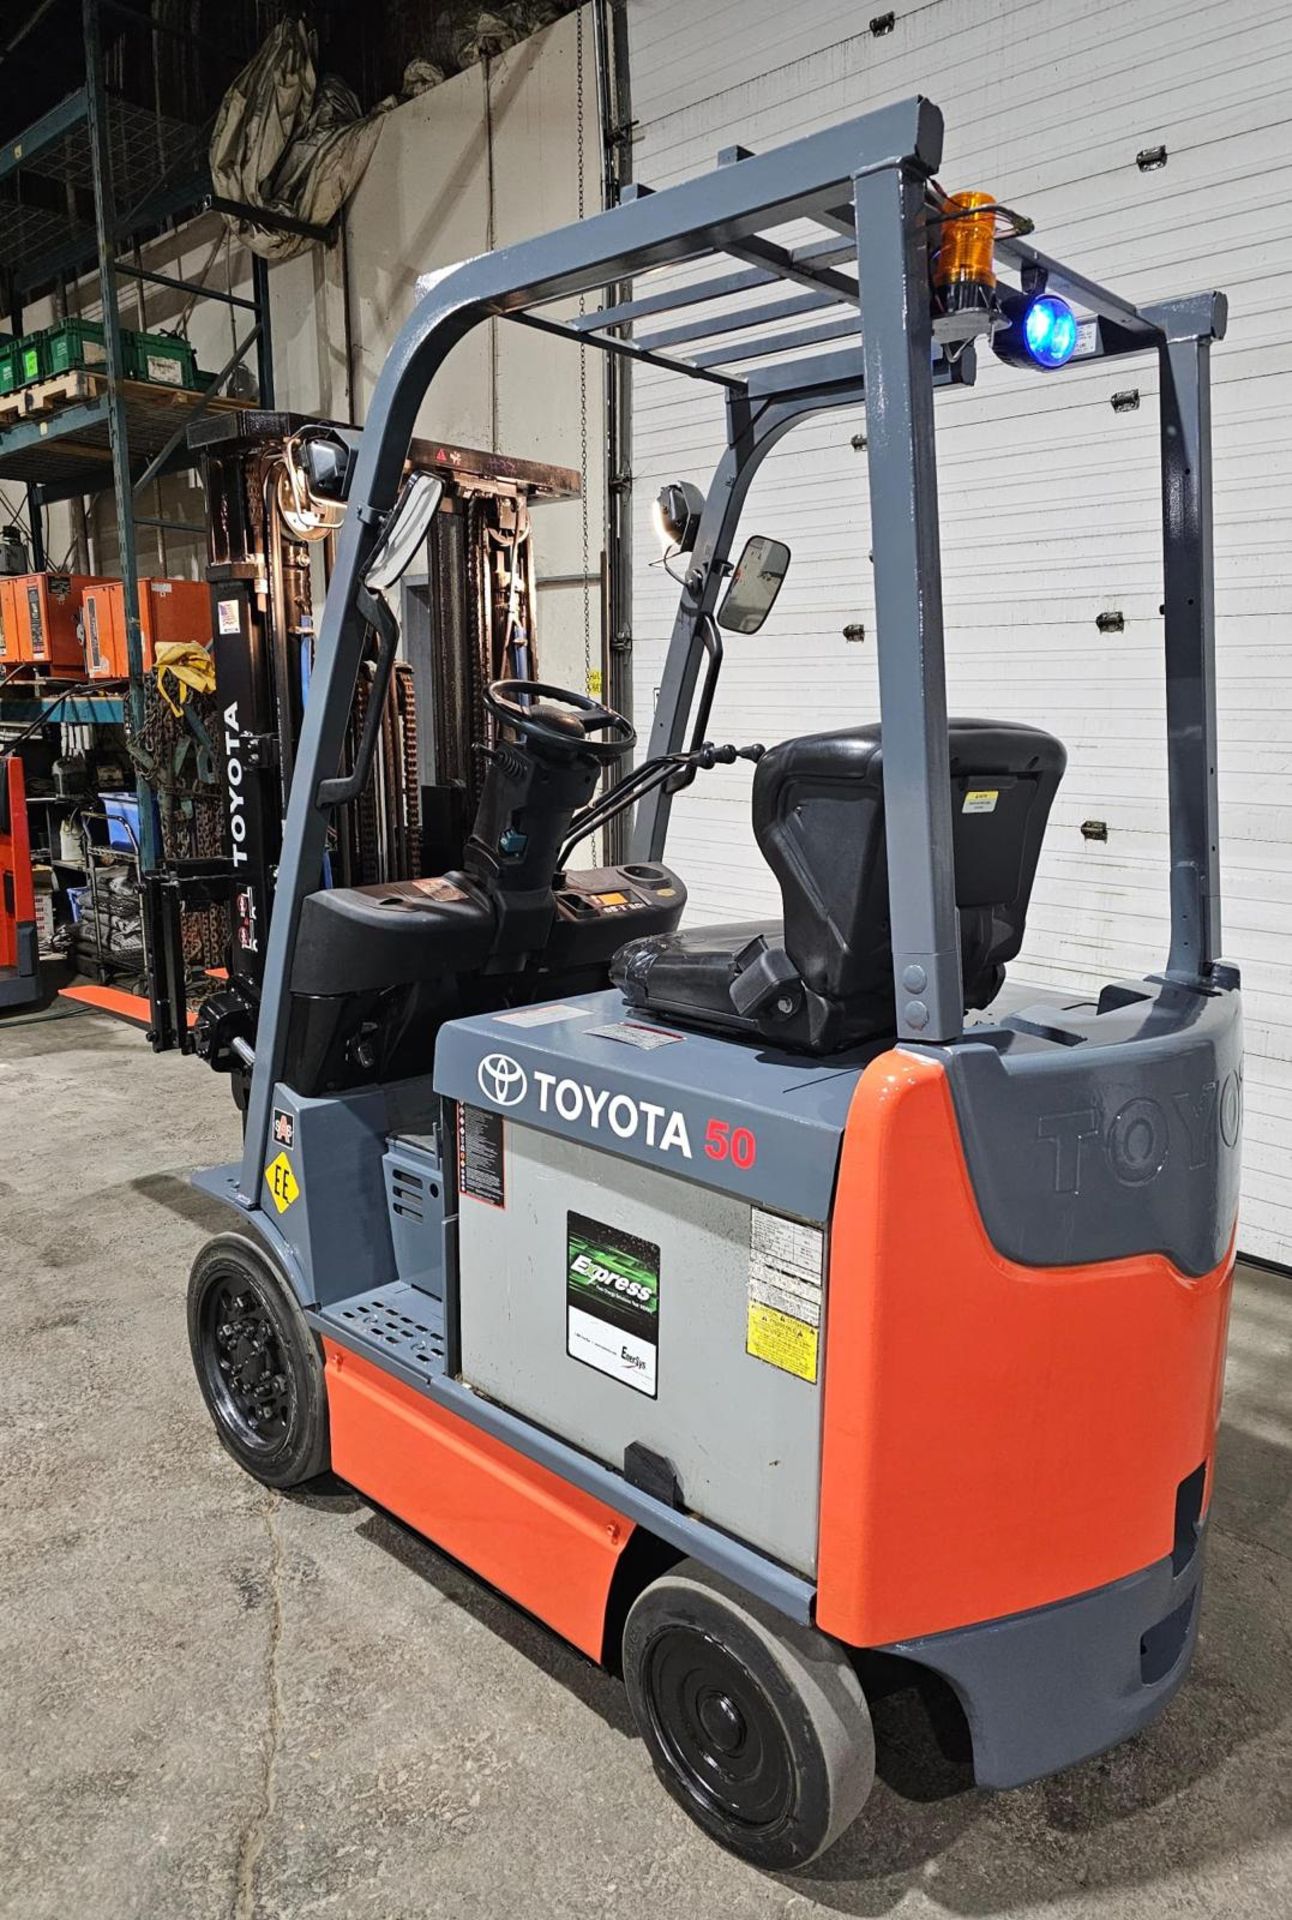 2012 TOYOTA 5,000lbs Capacity Electric Forklift EXPLOSION PROOF 48V with sideshift & 3-Stage Mast - Image 2 of 6